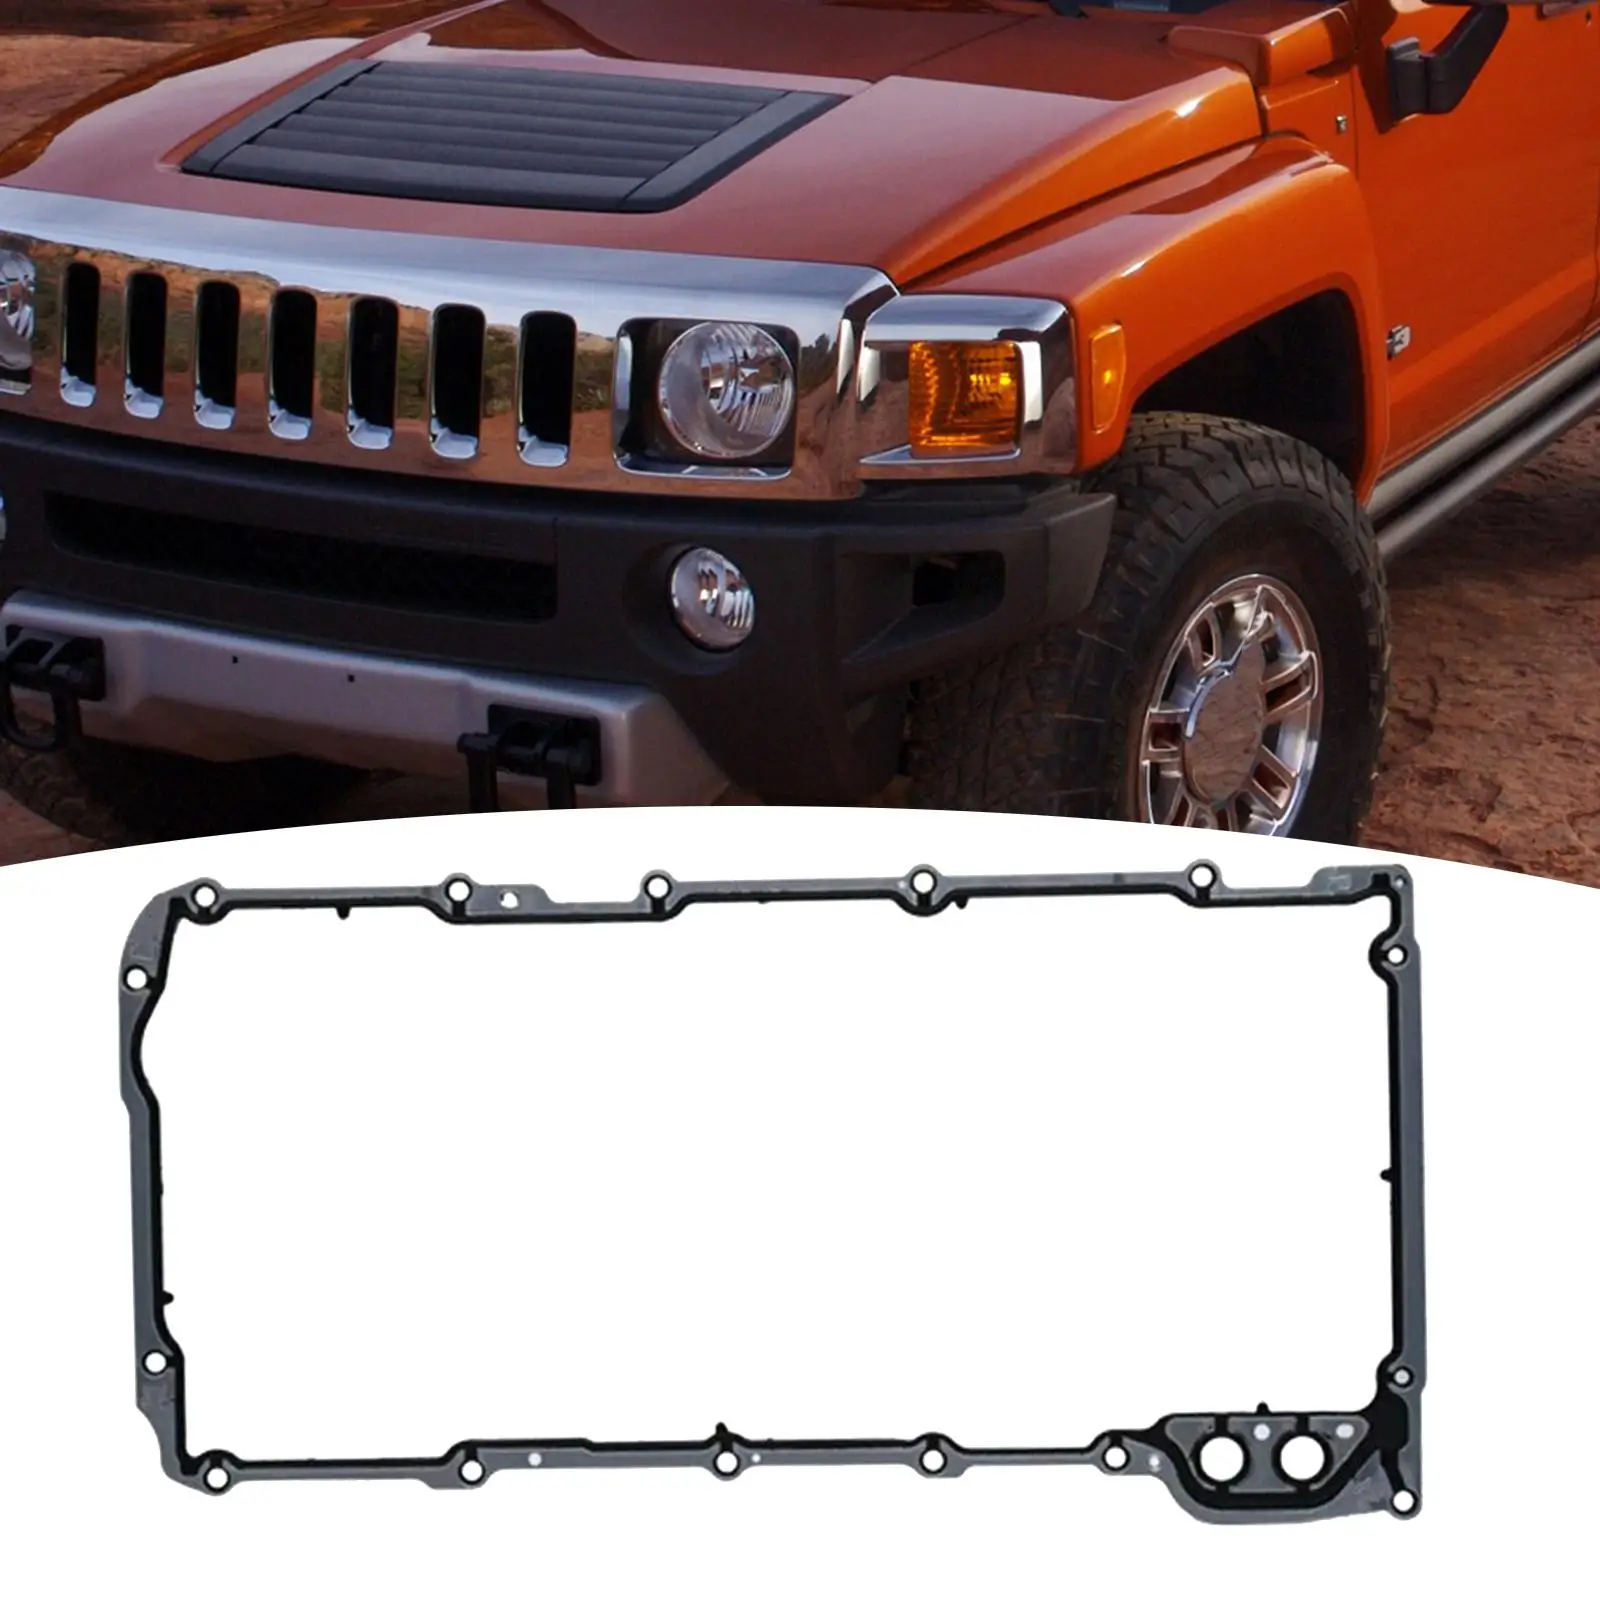 Cylinder Engine Oil Pan Gasket 12612350 for Hummer Replaces Premium Durable